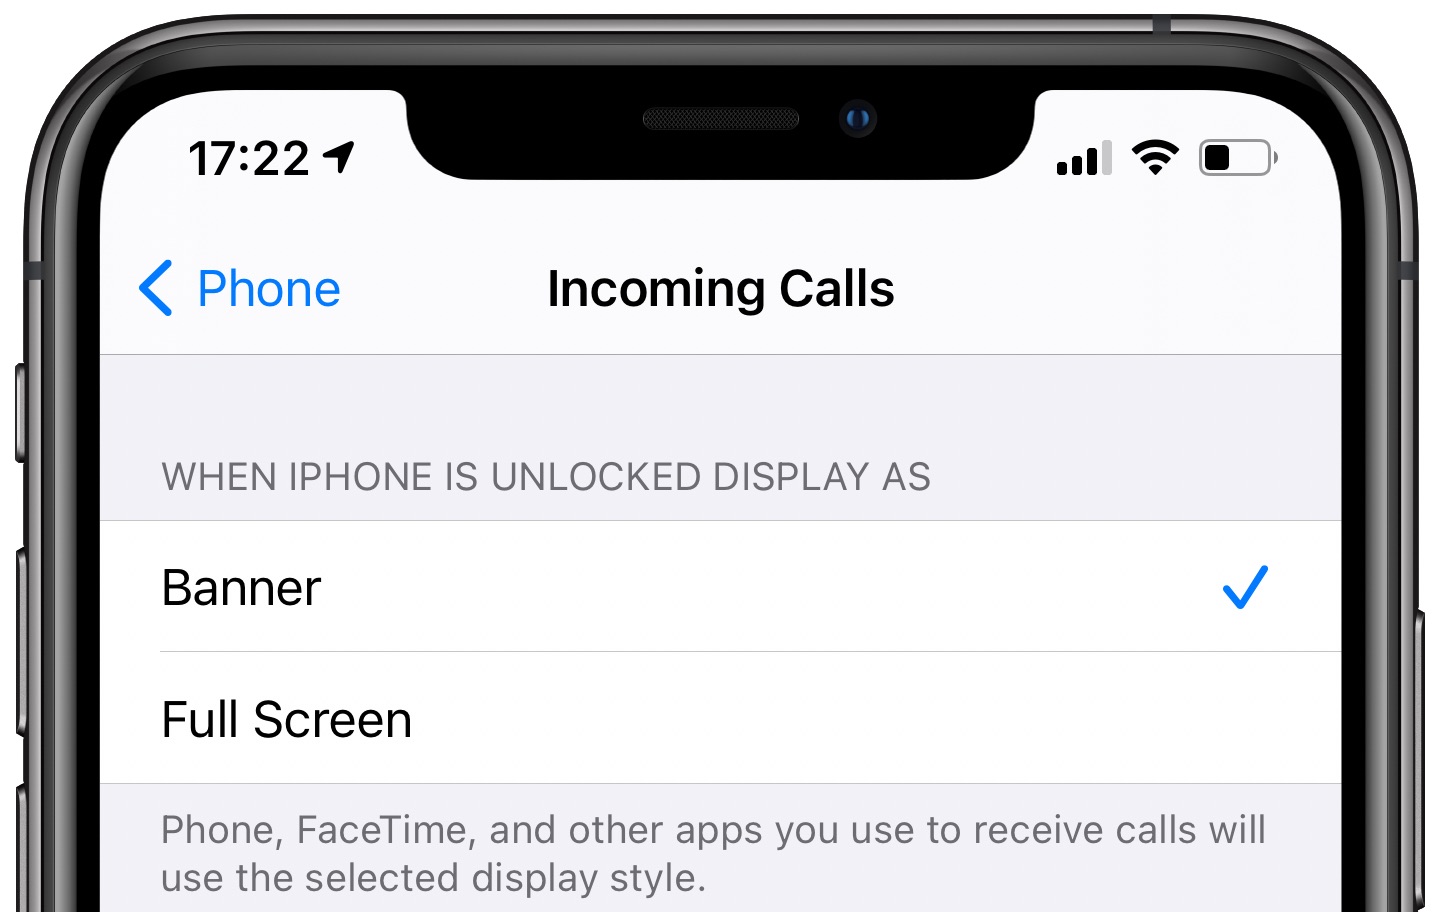 Compact calls iPhone iPad - Choosing the default style for incoming calls between Banner and Full Screen